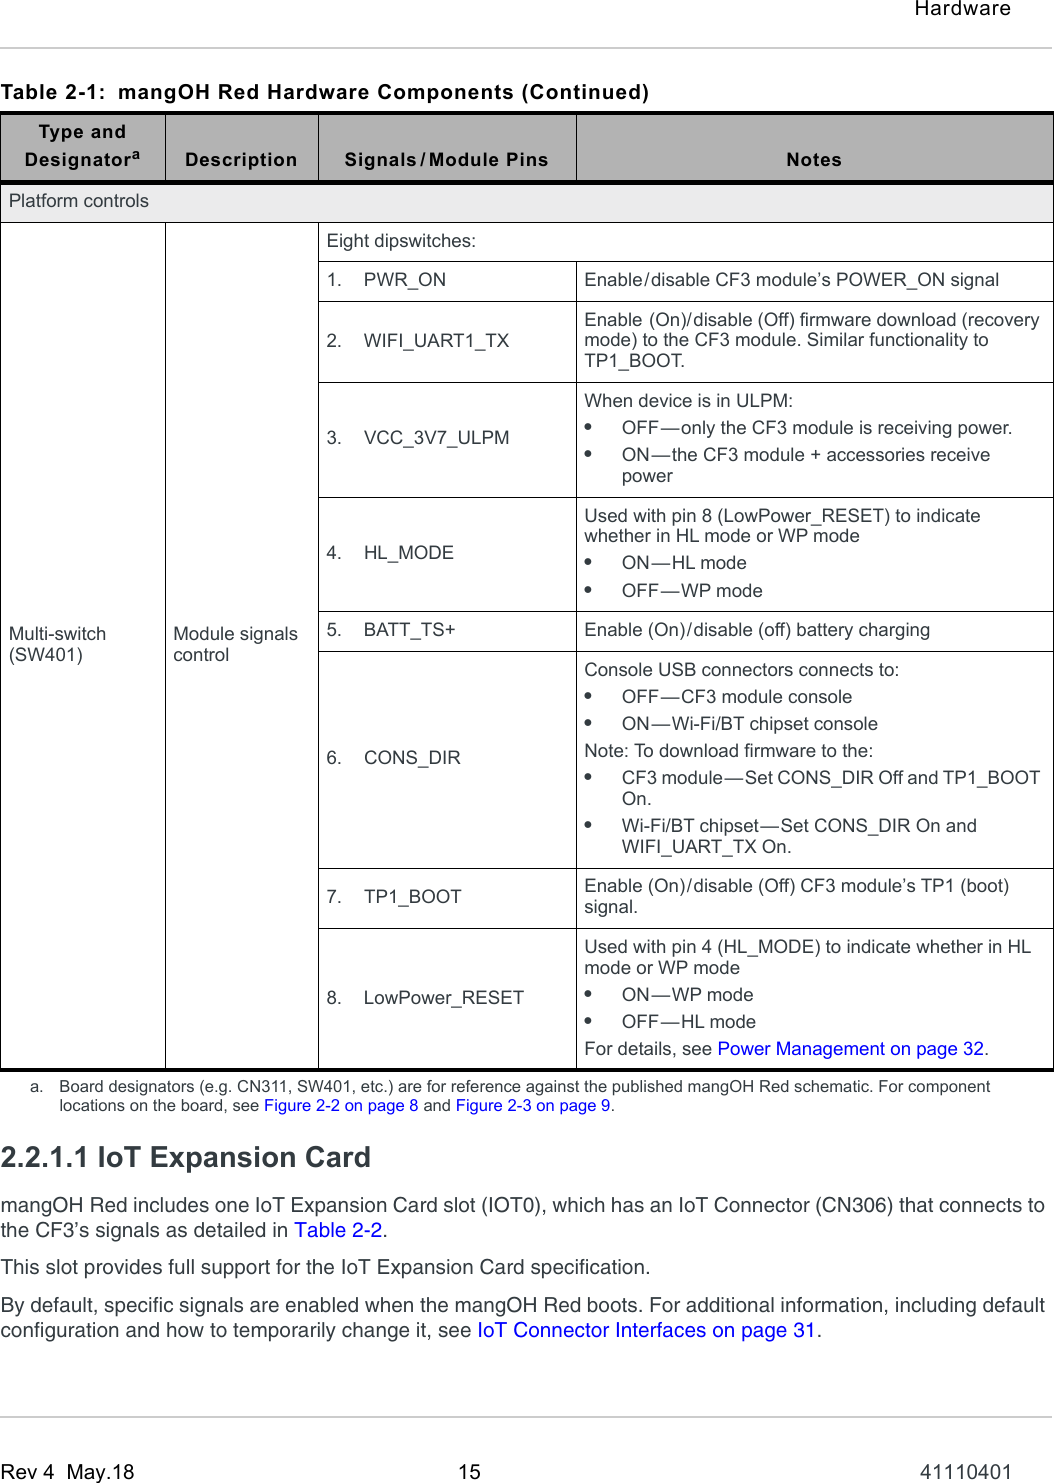 HardwareRev 4  May.18 15 411104012.2.1.1 IoT Expansion CardmangOH Red includes one IoT Expansion Card slot (IOT0), which has an IoT Connector (CN306) that connects to the CF3’s signals as detailed in Table 2-2.This slot provides full support for the IoT Expansion Card specification.By default, specific signals are enabled when the mangOH Red boots. For additional information, including default configuration and how to temporarily change it, see IoT Connector Interfaces on page 31.Platform controlsMulti-switch (SW401)Module signals controlEight dipswitches:1. PWR_ON Enable/disable CF3 module’s POWER_ON signal2. WIFI_UART1_TXEnable (On)/disable (Off) firmware download (recovery mode) to the CF3 module. Similar functionality to TP1_BOOT.3. VCC_3V7_ULPMWhen device is in ULPM:•OFF—only the CF3 module is receiving power.•ON—the CF3 module + accessories receive power4. HL_MODEUsed with pin 8 (LowPower_RESET) to indicate whether in HL mode or WP mode•ON—HL mode•OFF—WP mode5. BATT_TS+ Enable (On)/disable (off) battery charging6. CONS_DIRConsole USB connectors connects to:•OFF—CF3 module console•ON—Wi-Fi/BT chipset consoleNote: To download firmware to the:•CF3 module—Set CONS_DIR Off and TP1_BOOT On.•Wi-Fi/BT chipset—Set CONS_DIR On and WIFI_UART_TX On.7. TP1_BOOT Enable (On)/disable (Off) CF3 module’s TP1 (boot) signal.8. LowPower_RESETUsed with pin 4 (HL_MODE) to indicate whether in HL mode or WP mode•ON—WP mode•OFF—HL modeFor details, see Power Management on page 32.a. Board designators (e.g. CN311, SW401, etc.) are for reference against the published mangOH Red schematic. For component locations on the board, see Figure 2-2 on page 8 and Figure 2-3 on page 9.Table 2-1: mangOH Red Hardware Components (Continued)Type and DesignatoraDescription Signals / Module Pins Notes